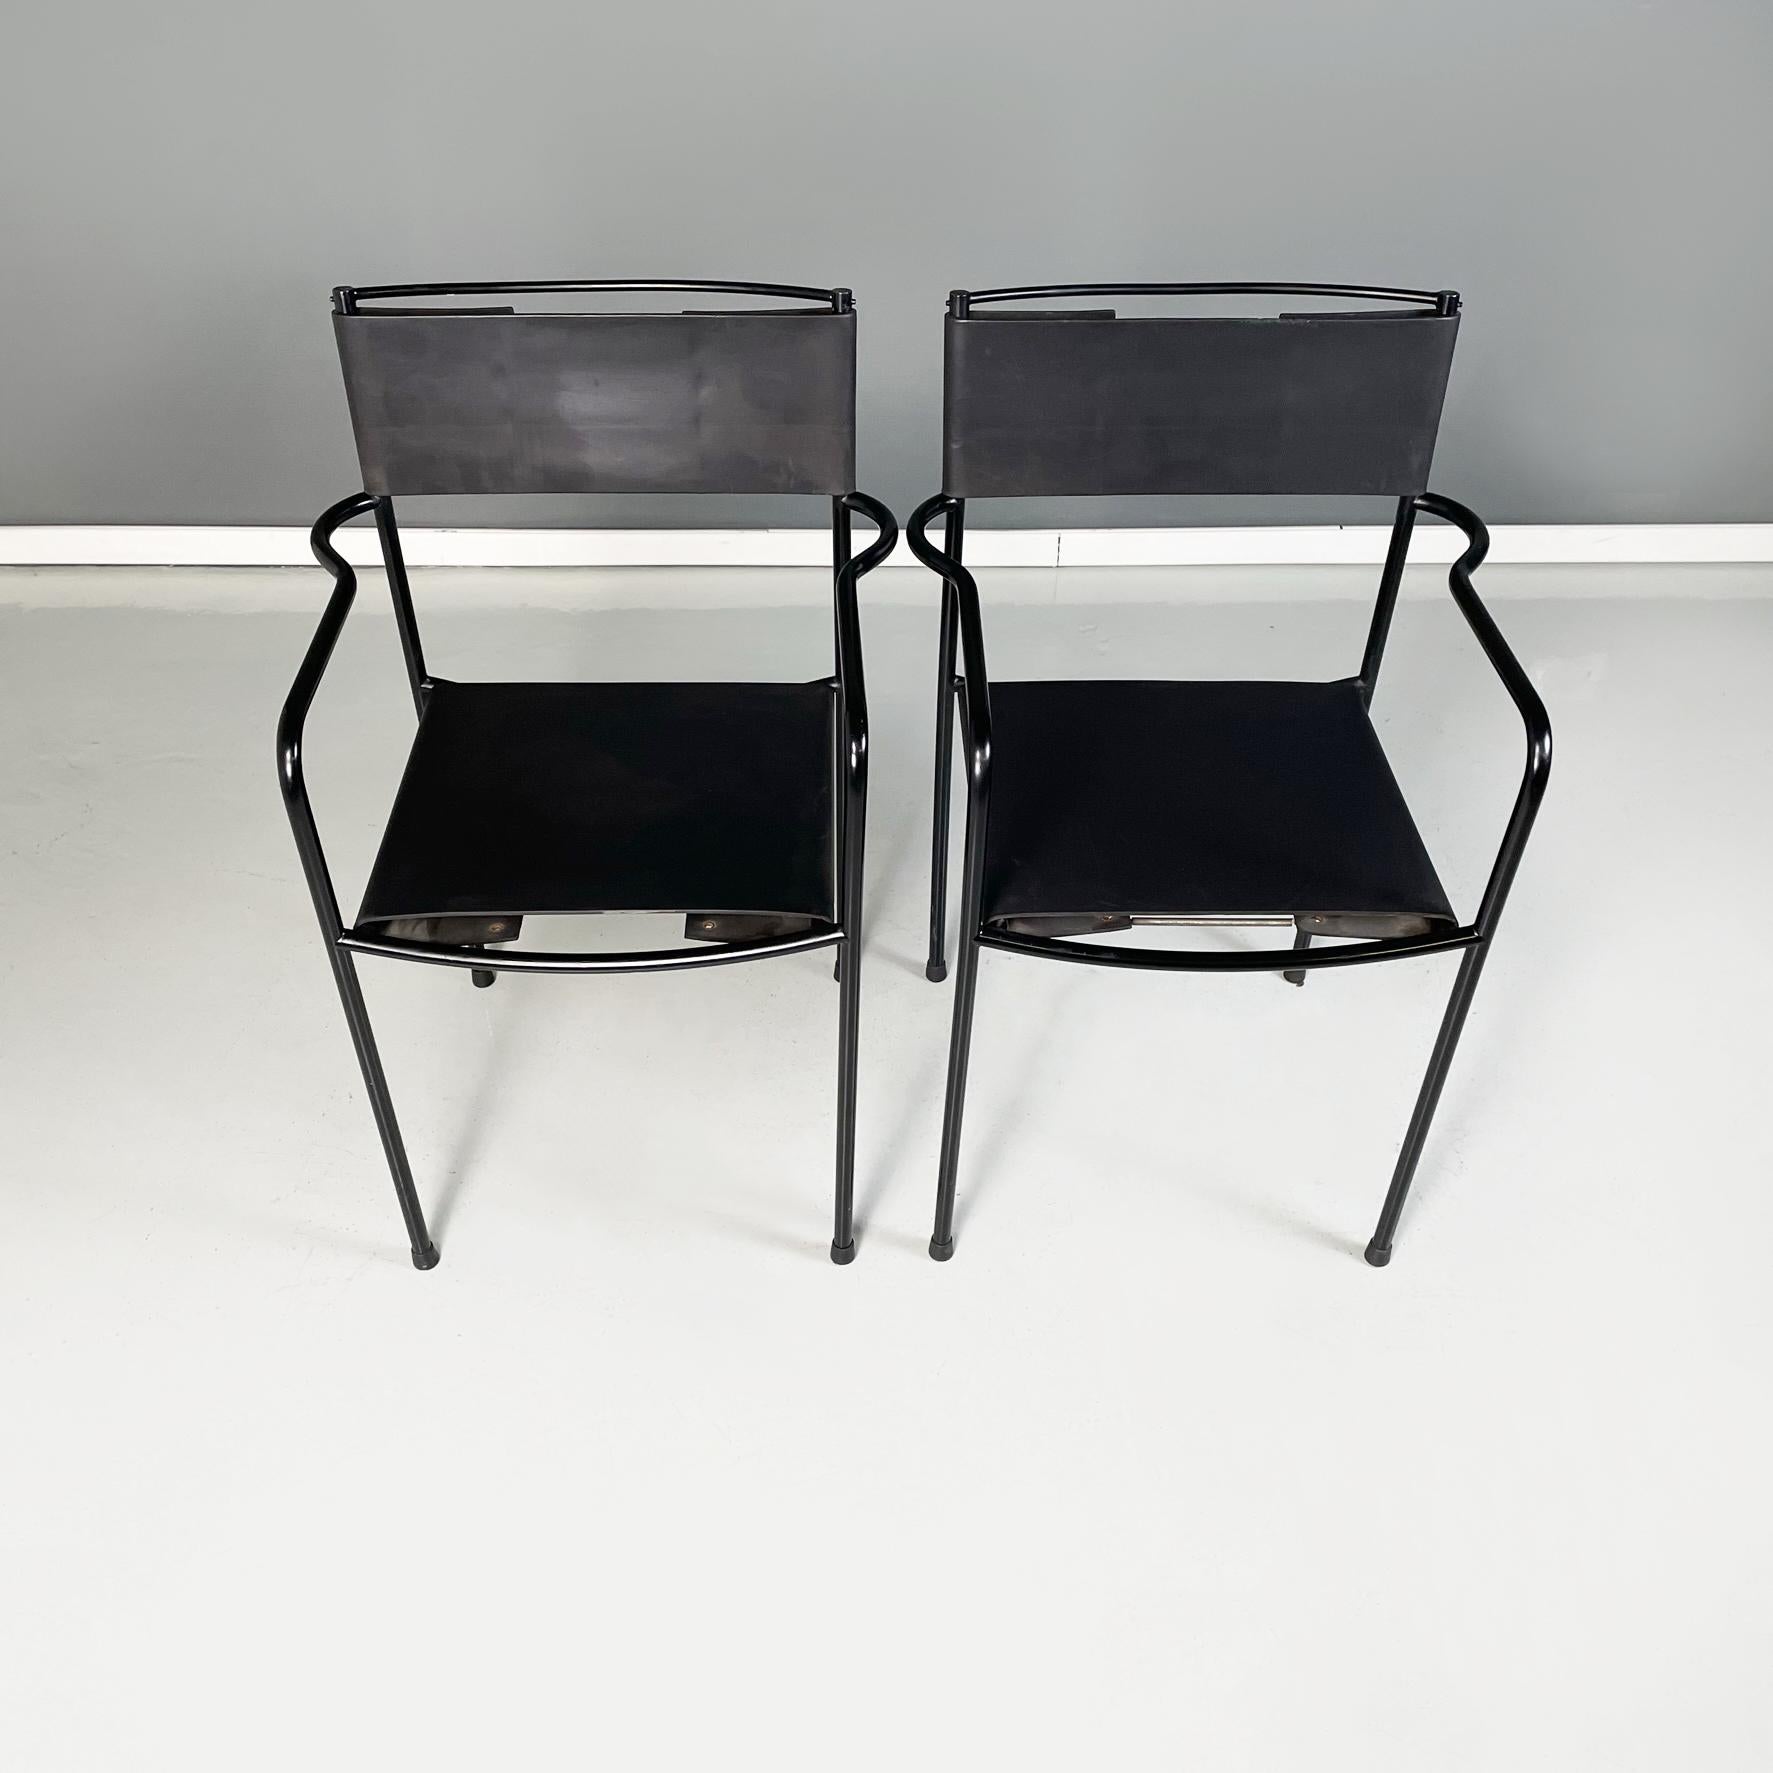 Italian modern chairs mod. Spaghetti by Giandomenico Belotti for Alias Design, 1980s
Pair of chairs mod. Spaghetti with rectangular seat and back in black ecological leather and springs on the back. The structure is in tubular metal, painted in